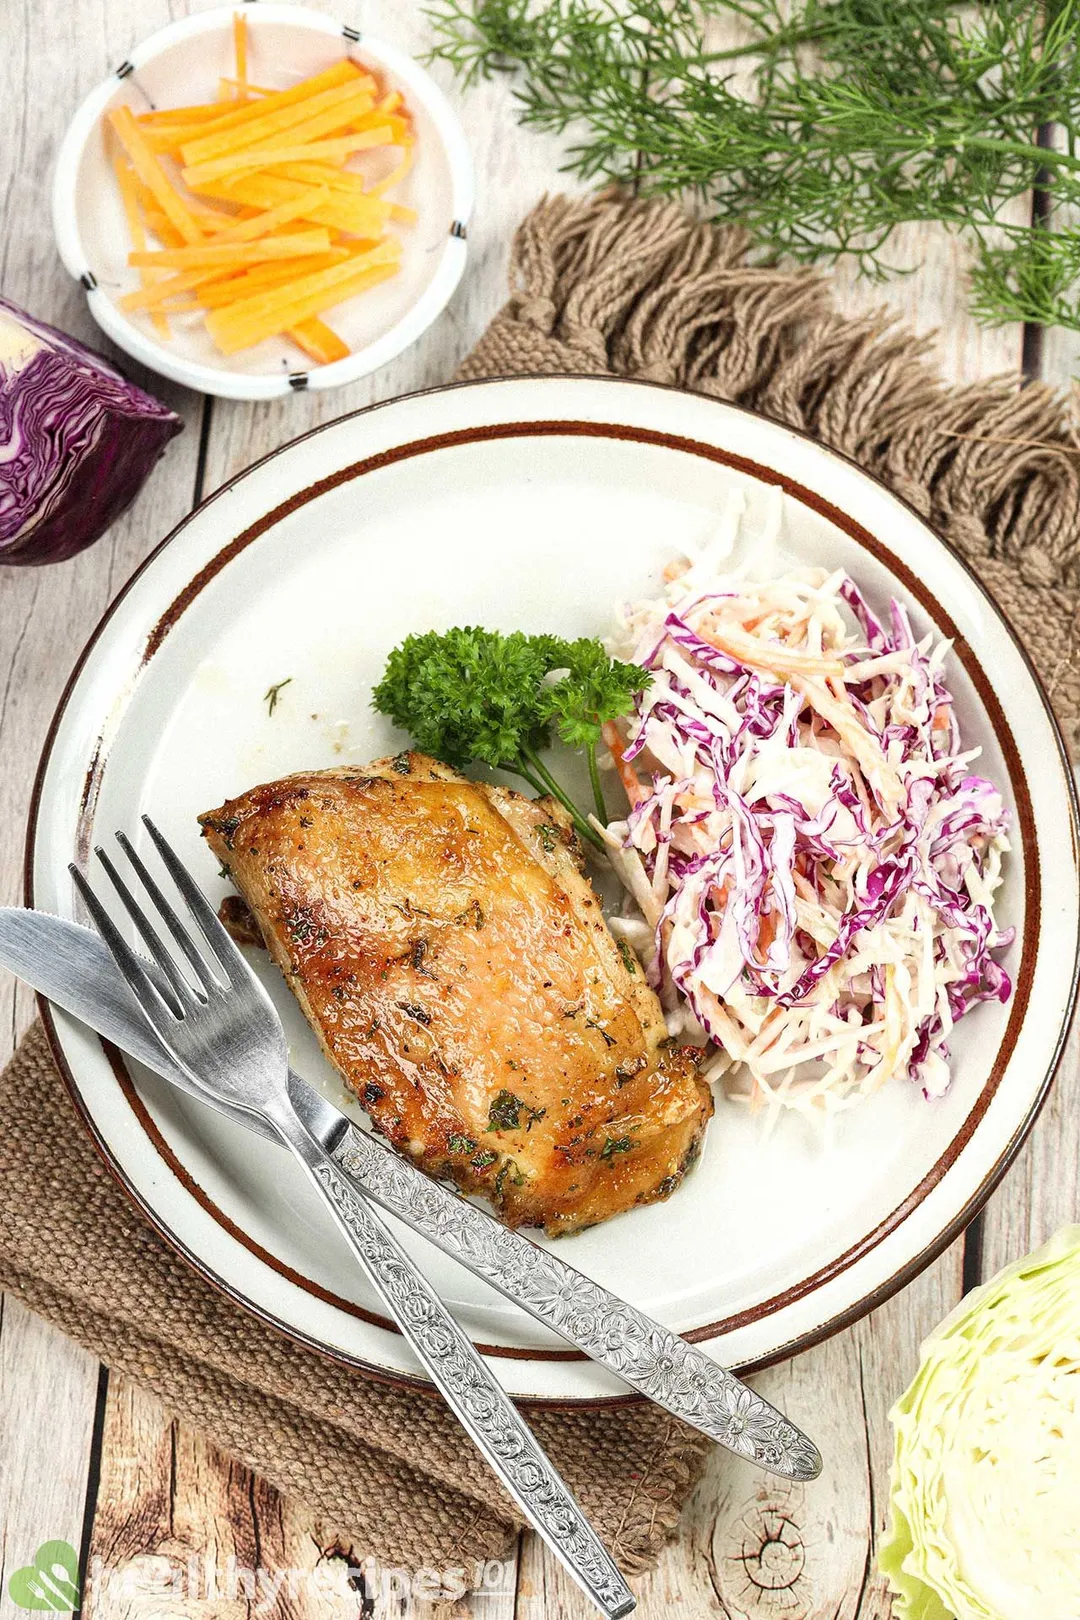 top view of a cooked ranch chicken thigh on a plate with shredded cabbage salad